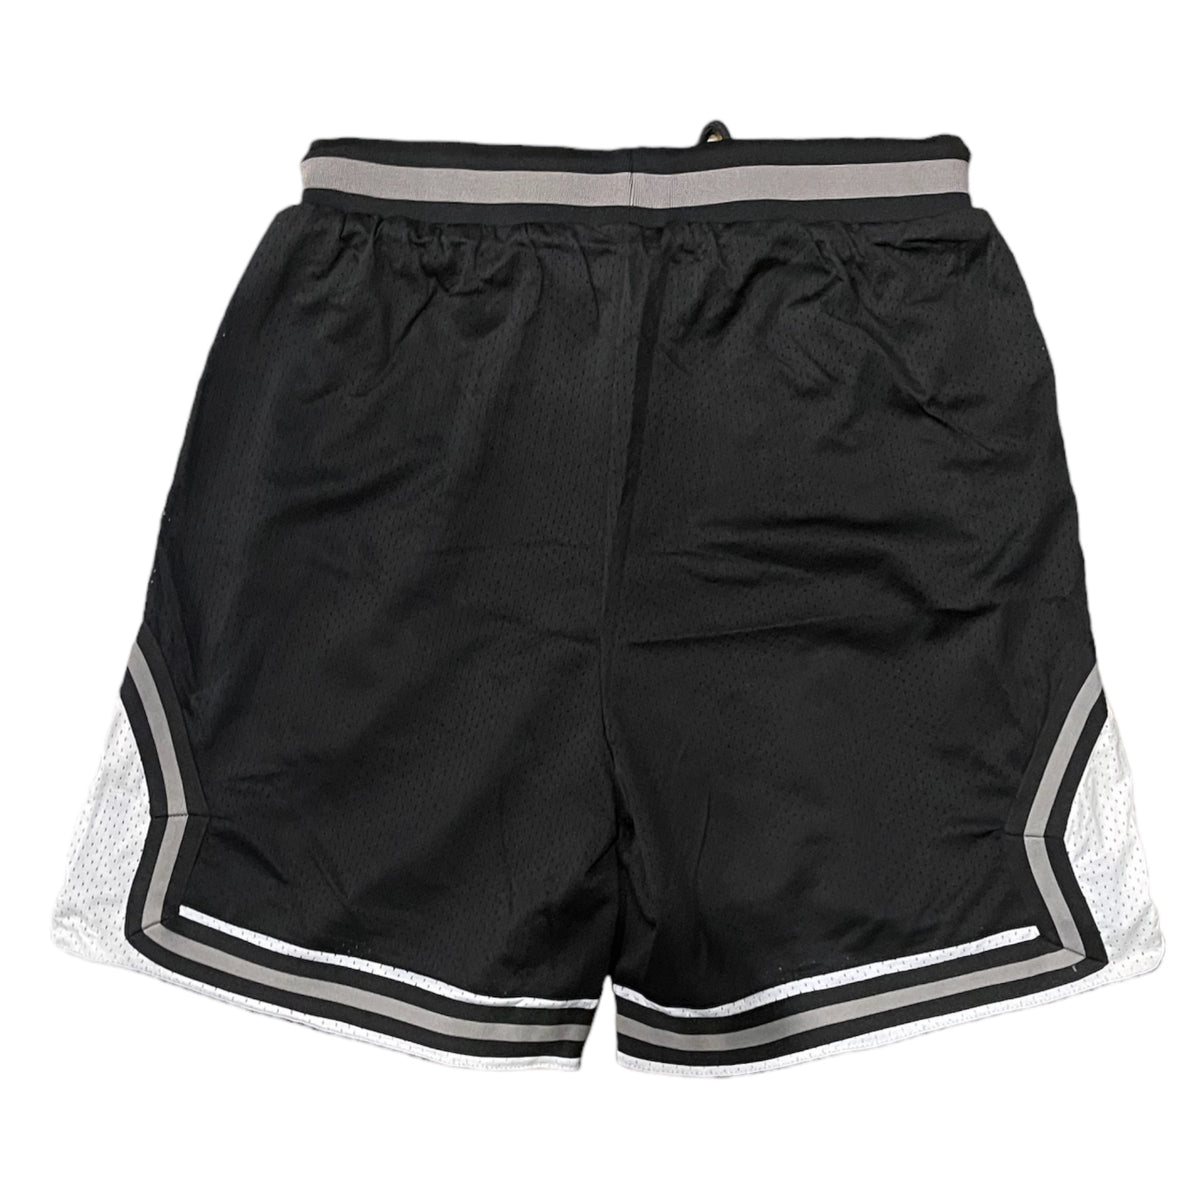 Hoop League Stitched Classic San Antonio Game Ready Shorts Black